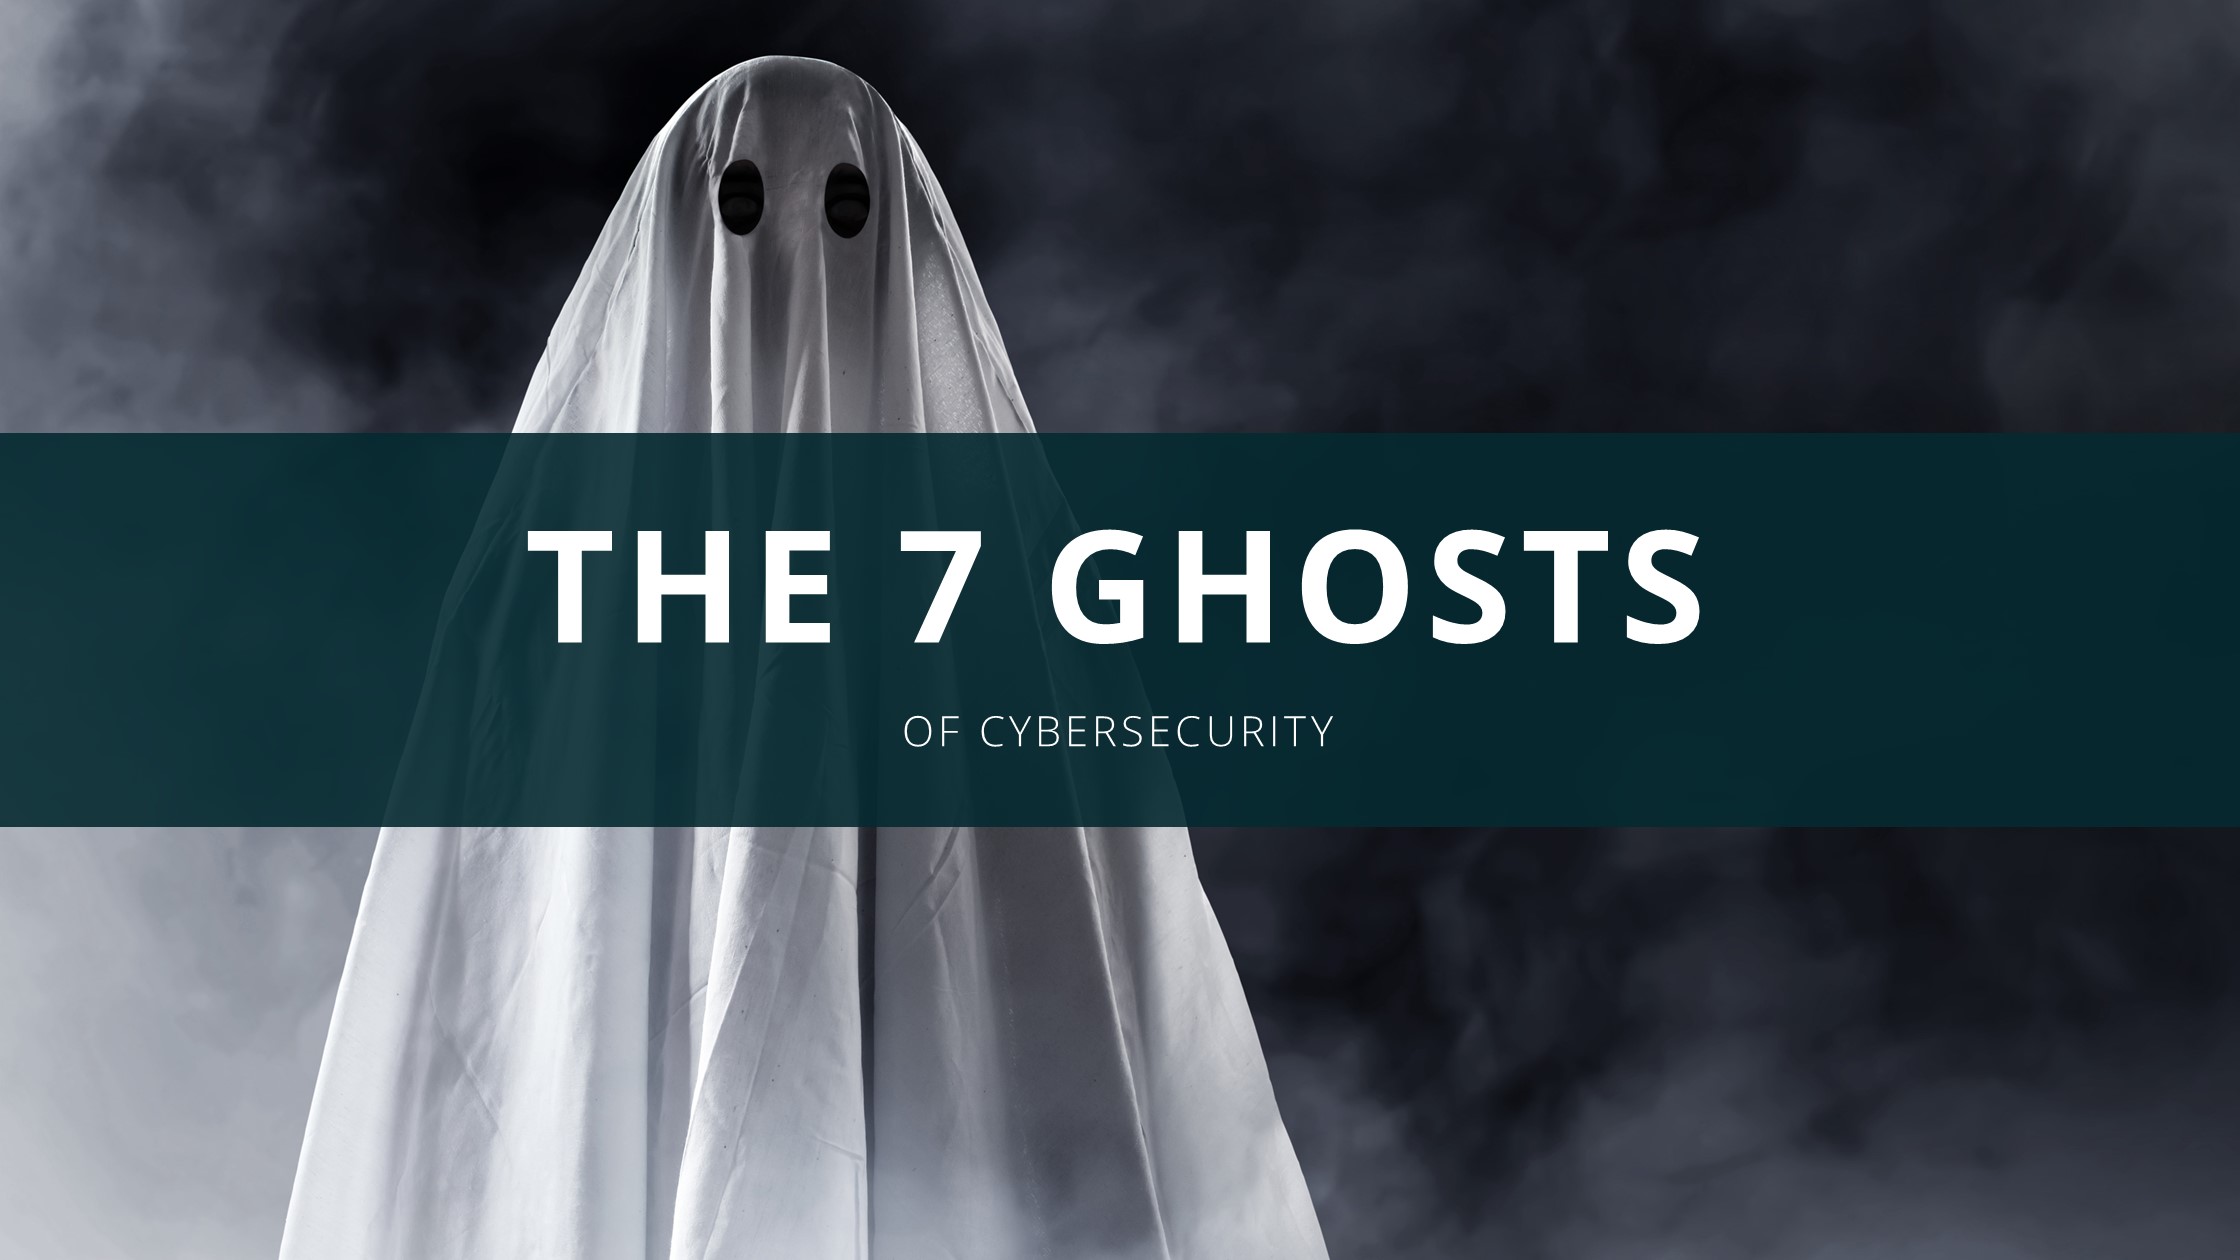 A Halloween Ghost with banner The 7 ghosts of Cybersecurity